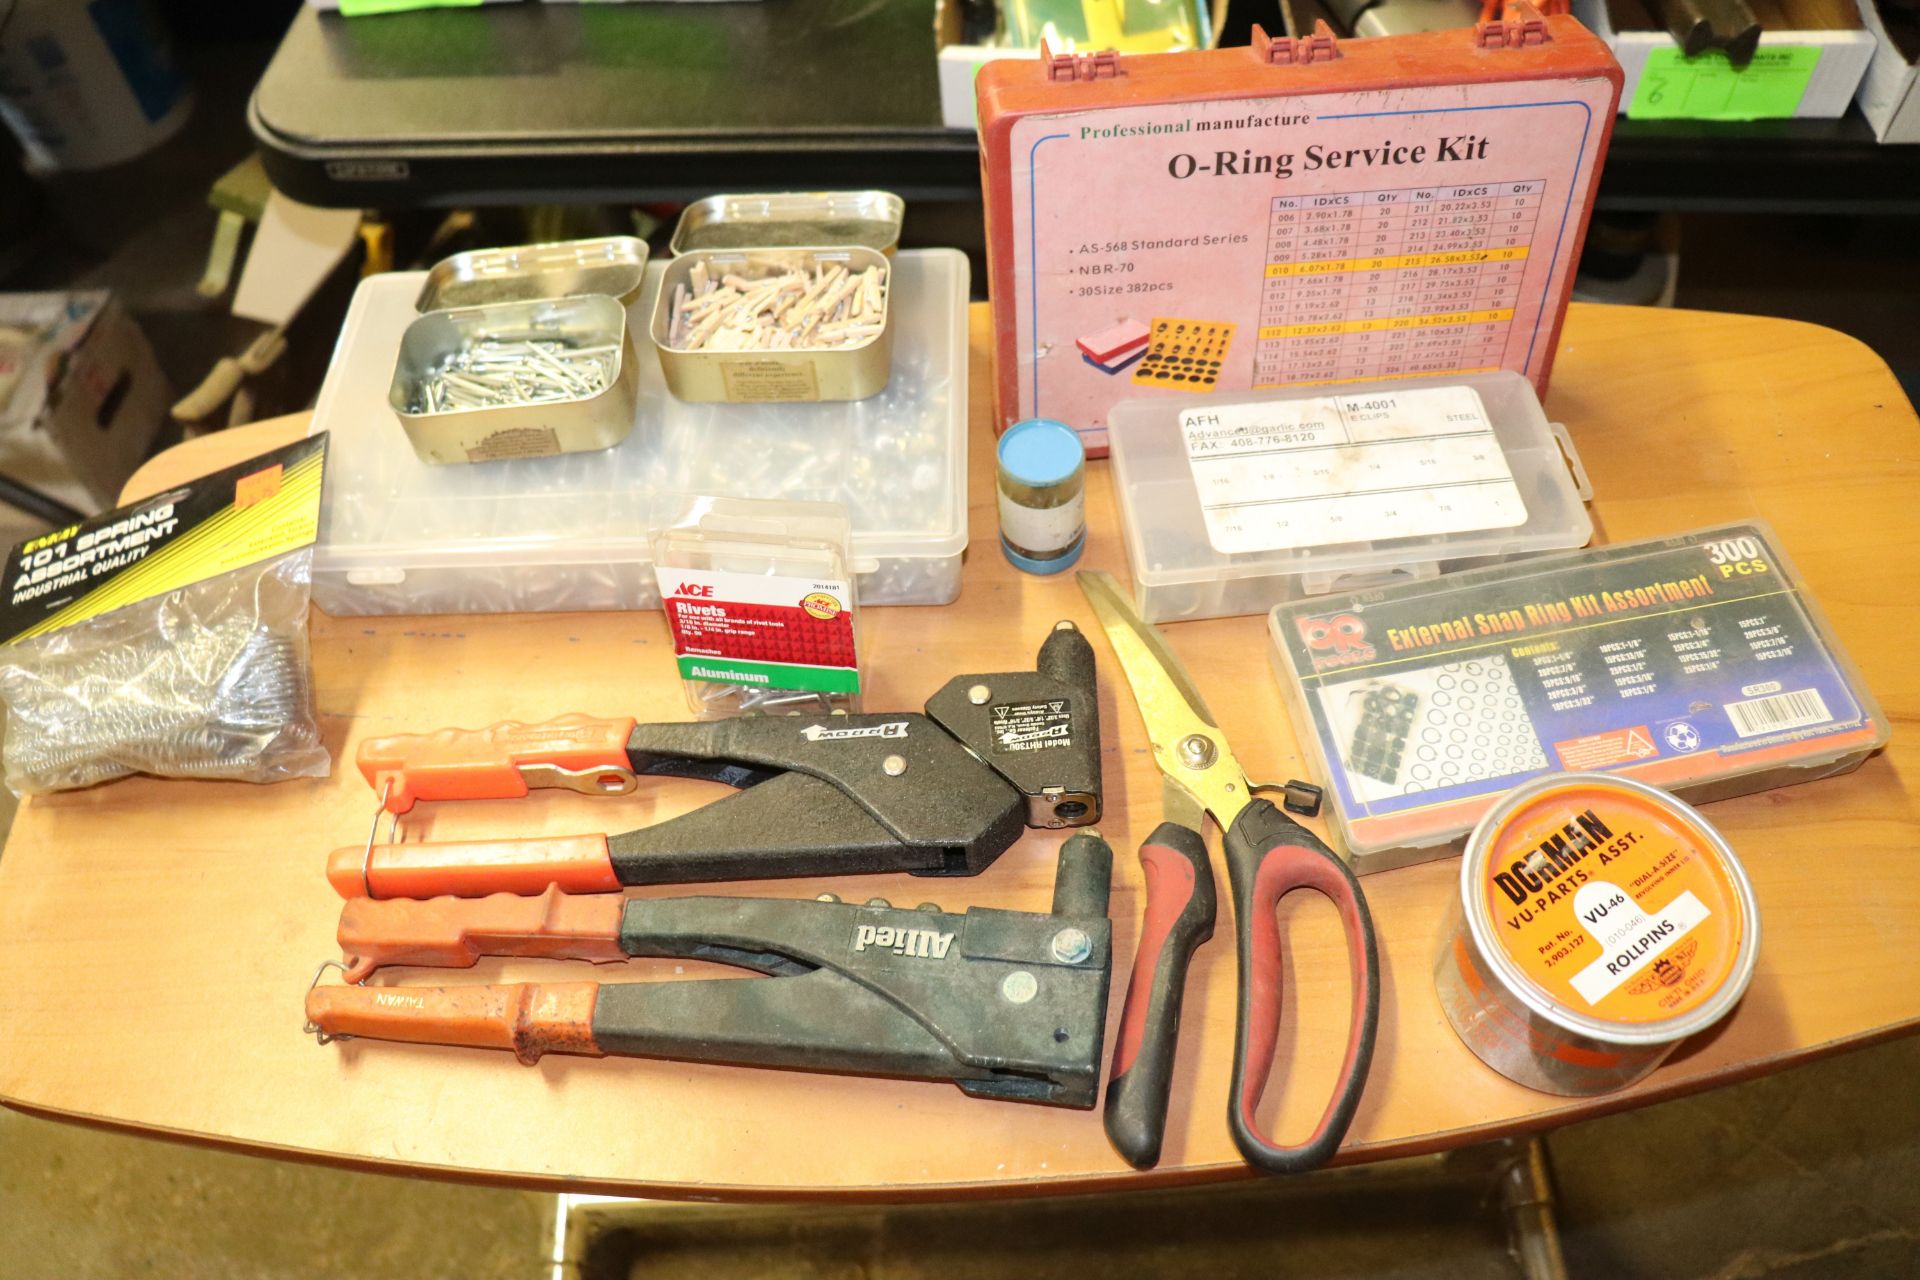 Allied and Arrow rivet gun, rivets, snap ring kit, O-ring service kit and other miscellaneous